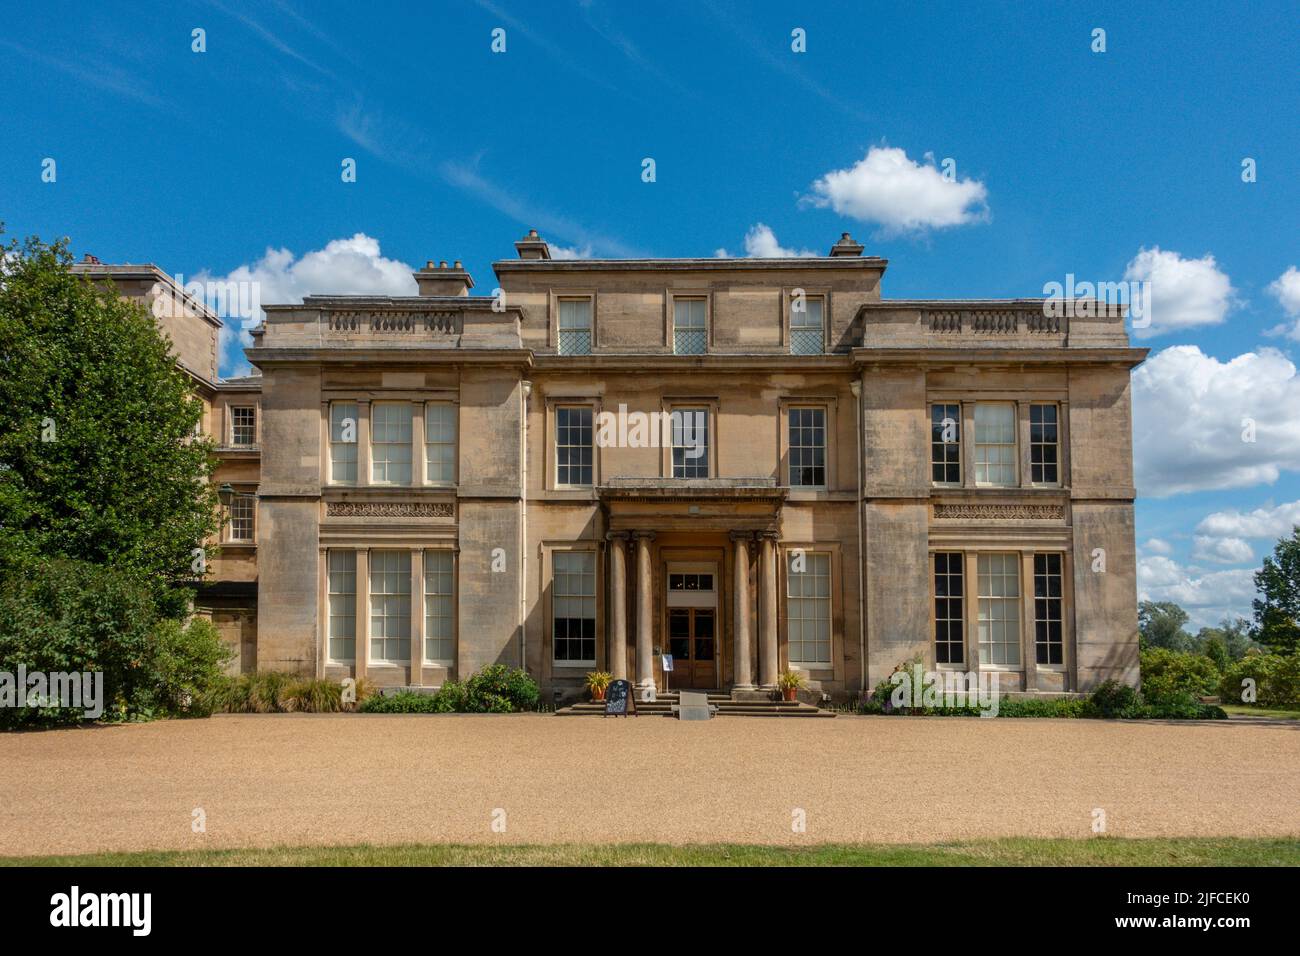 Normanby Hall,Normanby,North Lincolnshire,England Normanby Hall is a stunning Regency mansion, set in an idyllic 300 acre estate in the heart of North Stock Photo